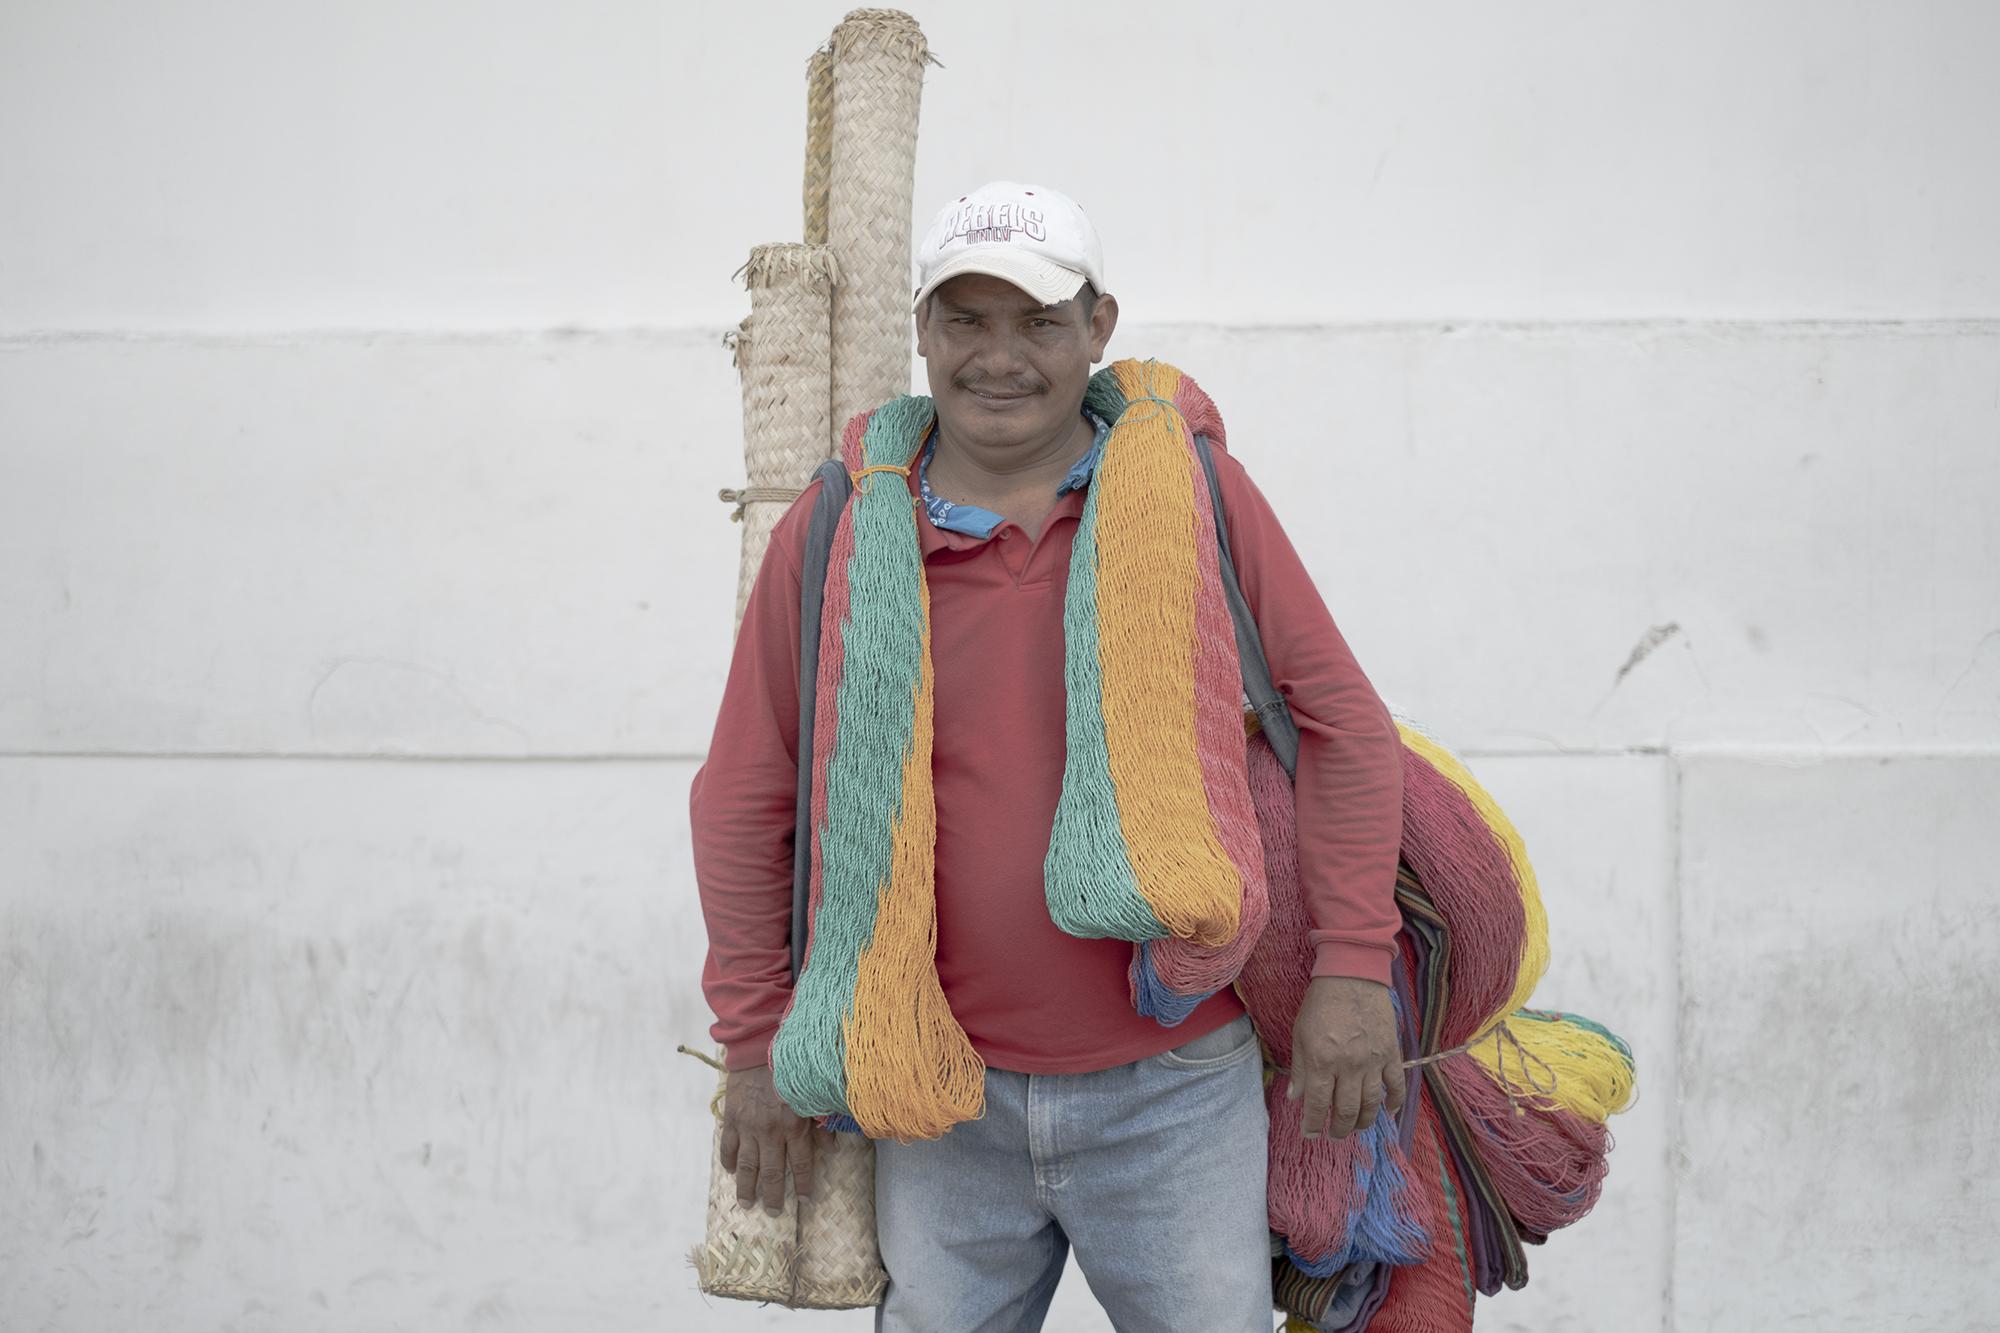 Eduardo Tunakalet, 50, travels between his home in Sensuntepeque and different neighborhoods of San Salvador selling hammocks and mats. His sales support his wife and two children. “Staying home leaves me and my family without sustenance. I’ll be careful, but I will always go out to sell,” he stated.